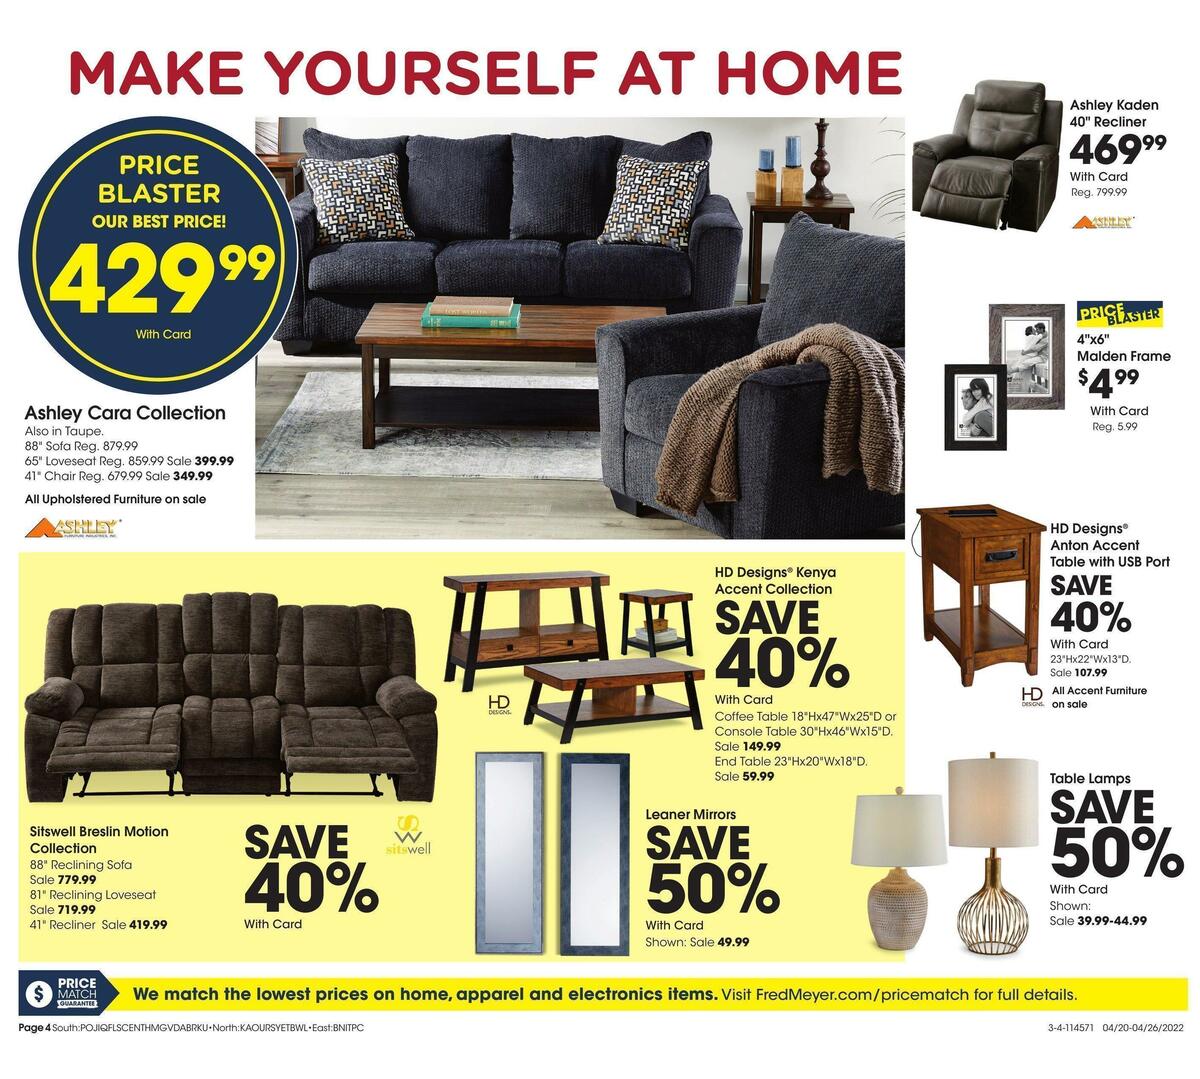 Fred Meyer General Merchandise Weekly Ad from April 20